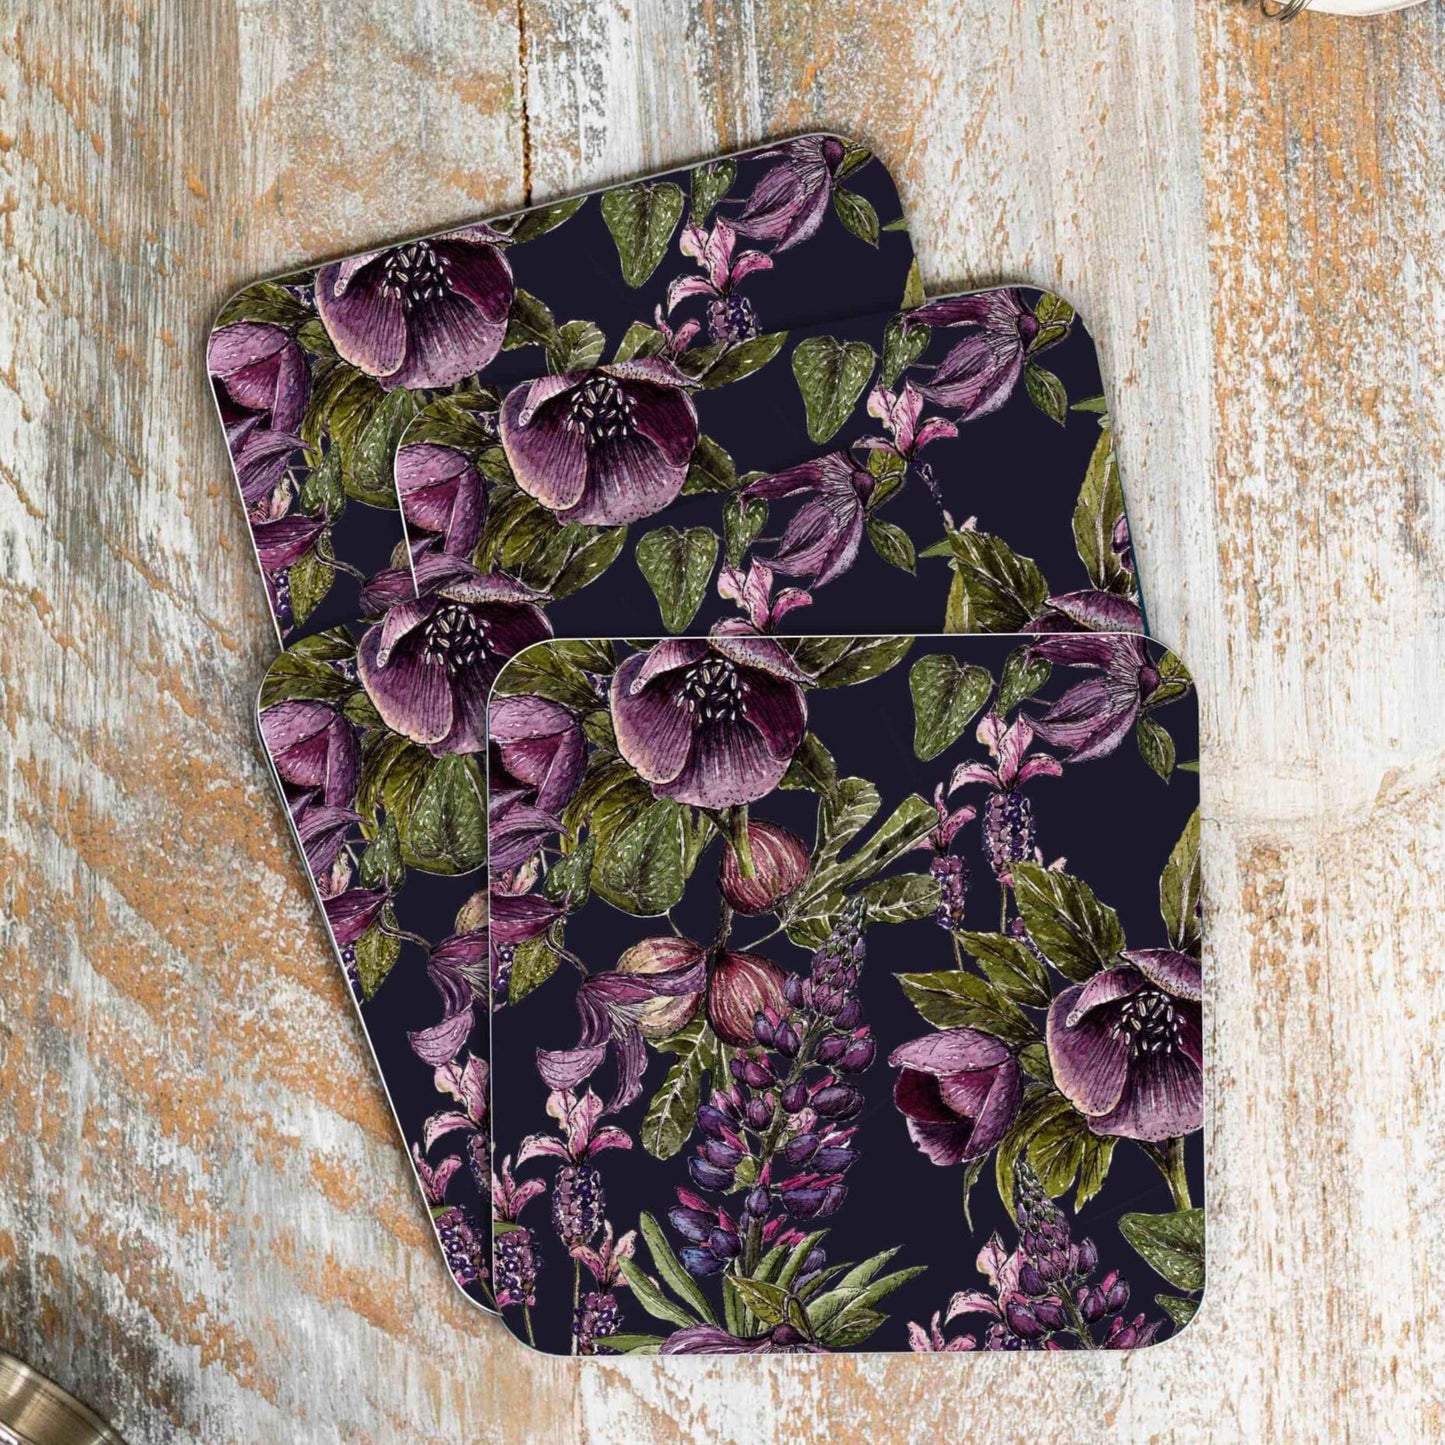 Stack of 4 coasters with purple and black floral design. Photographed on a wooden surface.